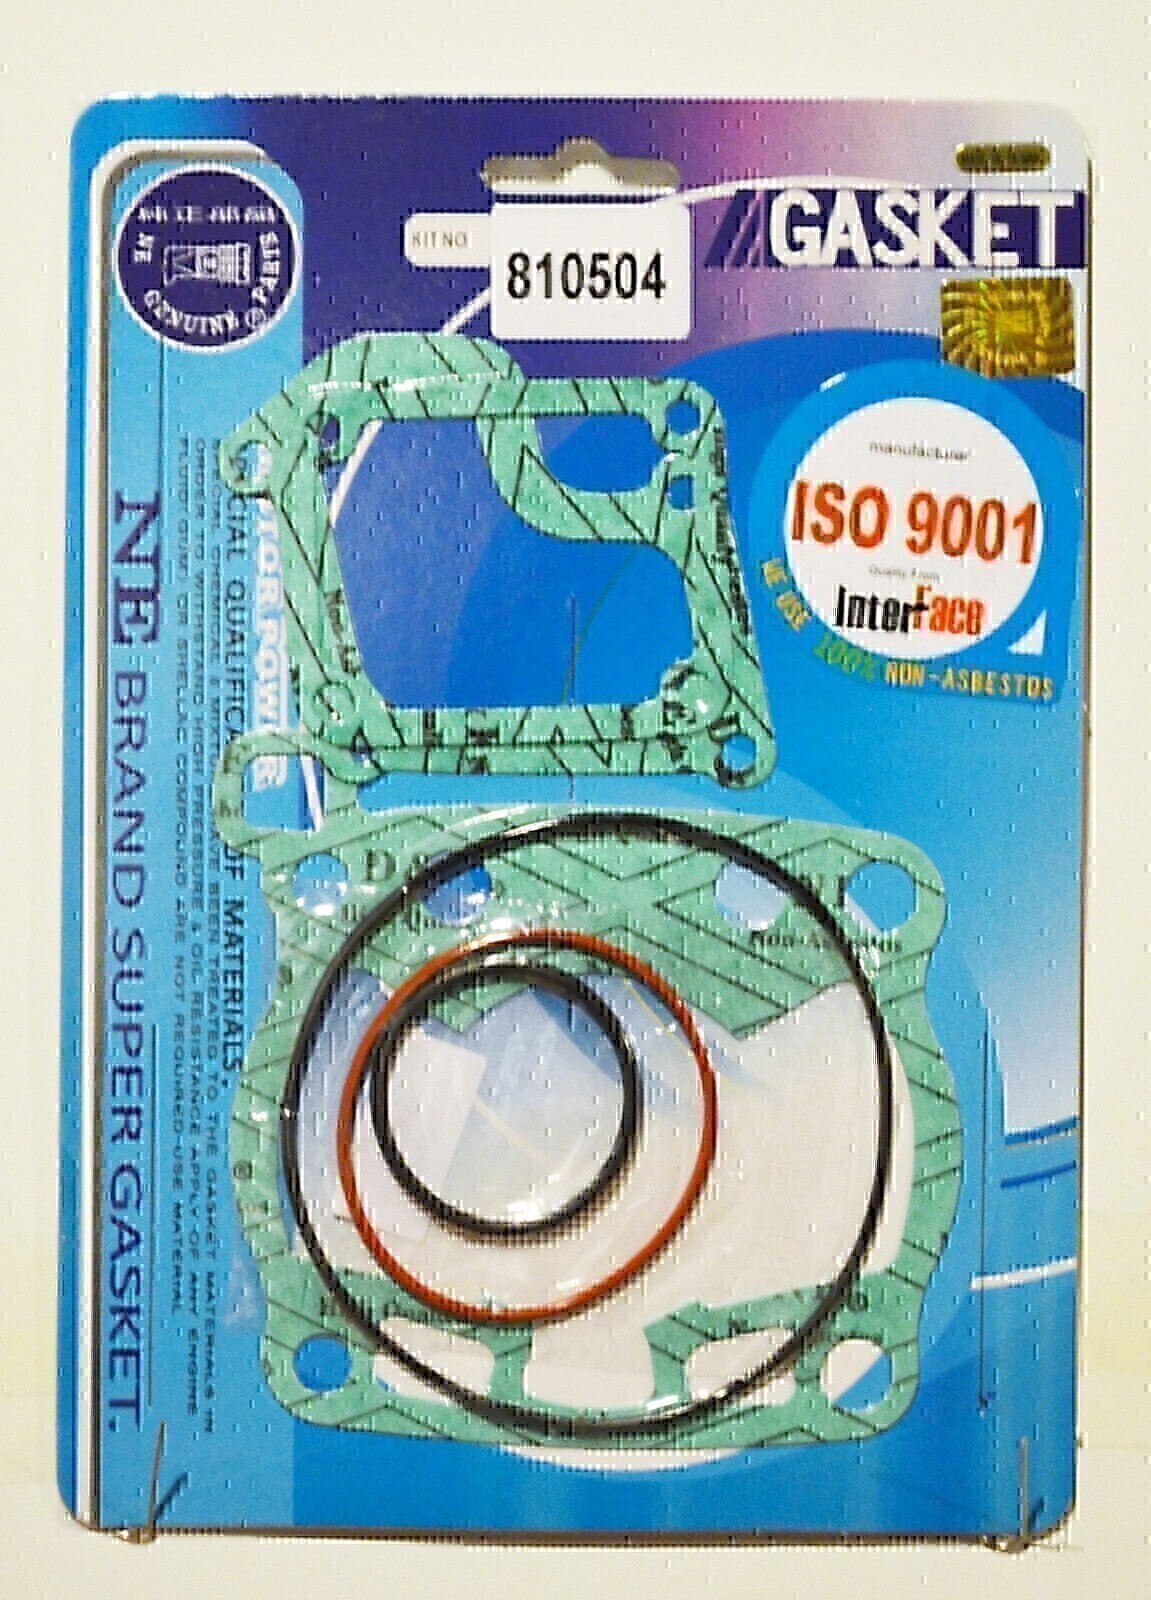 TOP END GASKET KIT FOR SUZUKI RM80 RM 80 1991 - 2001